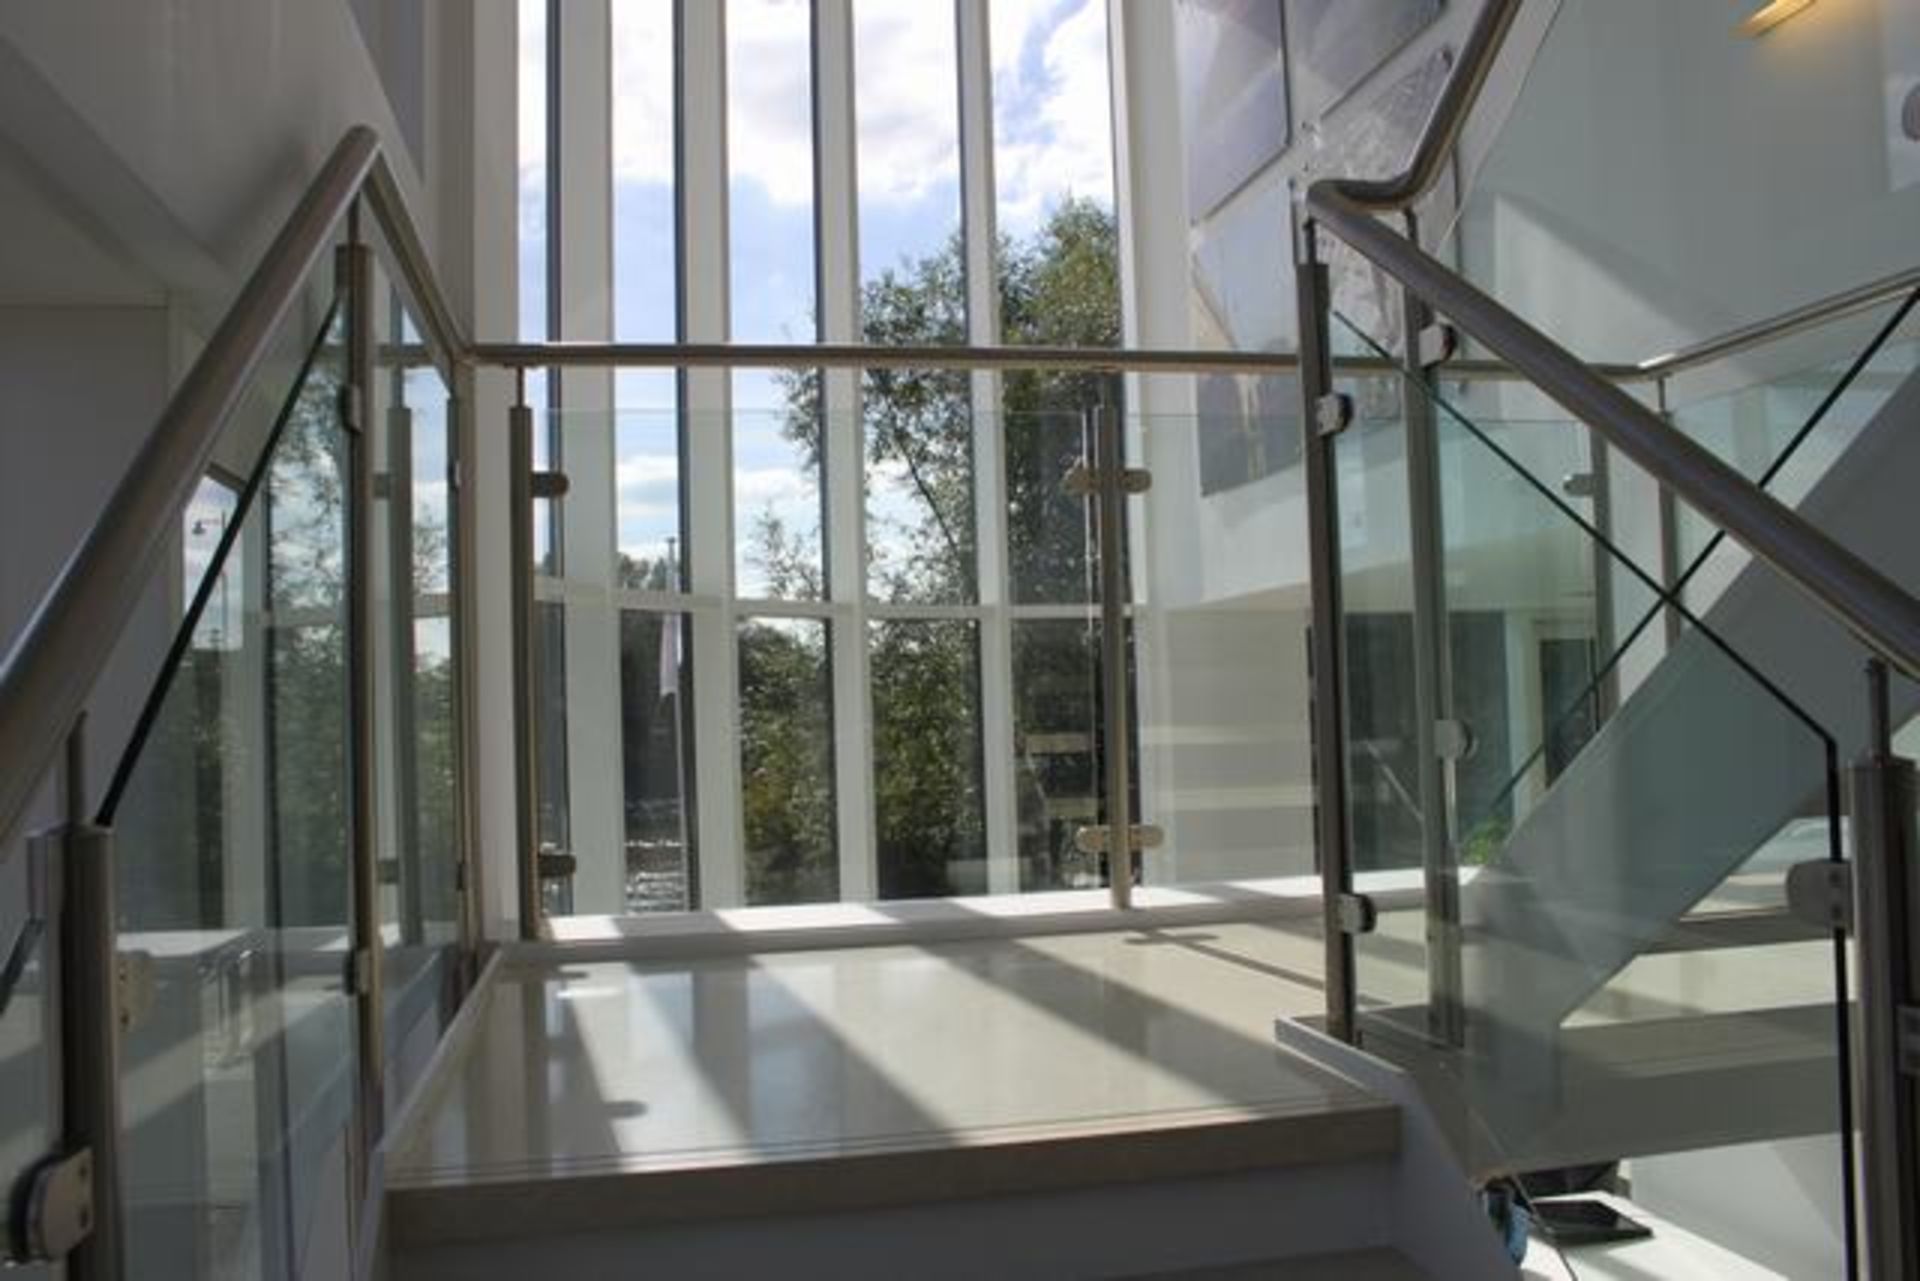 8 x Toughened glass balustrade panels 10mm thick rake angled 950mm x 600mm ( this is glass panels